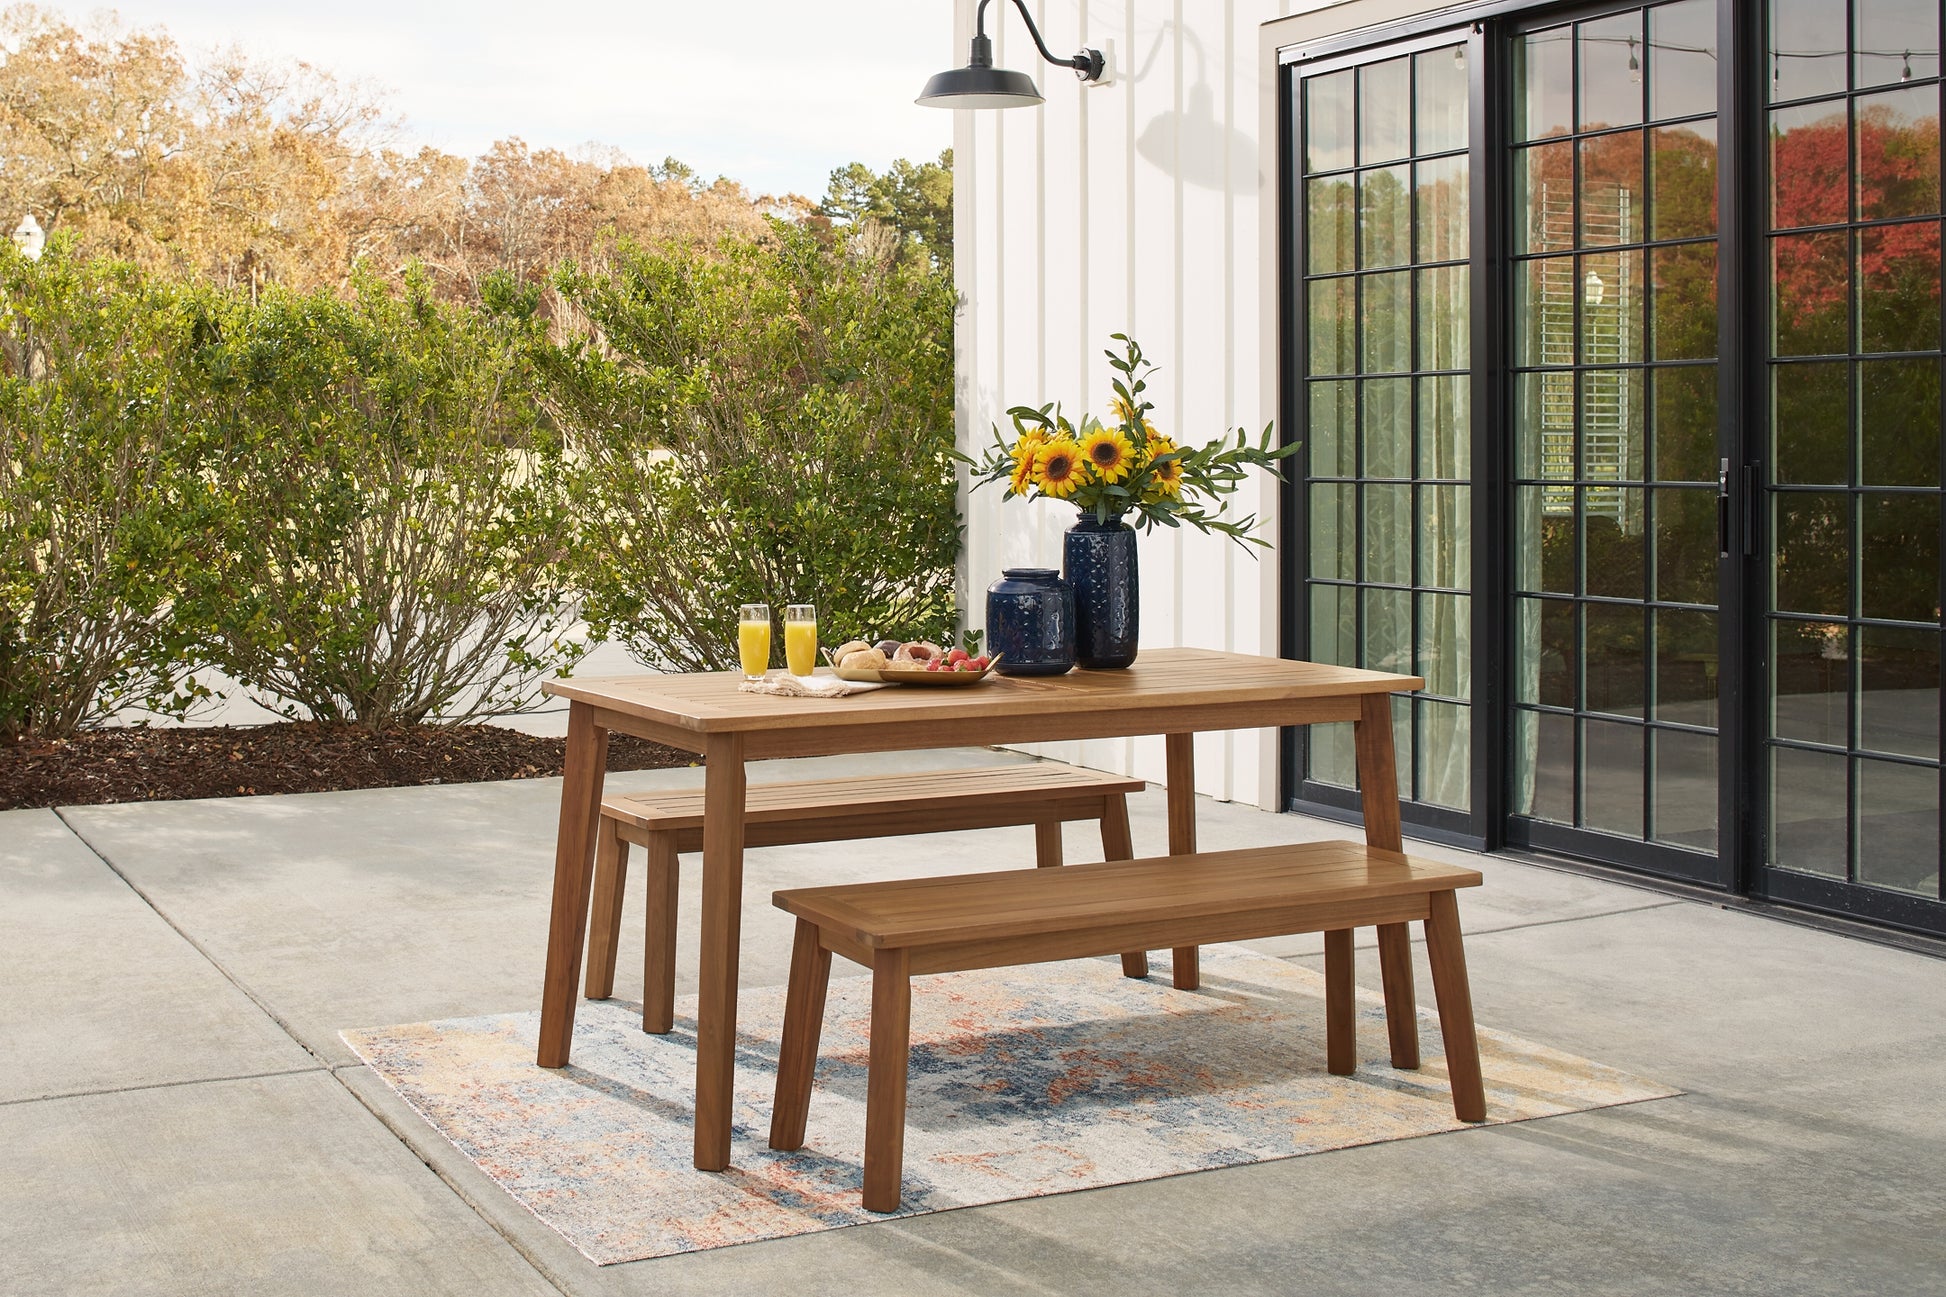 Janiyah Outdoor Dining Table and 2 Benches JB's Furniture  Home Furniture, Home Decor, Furniture Store